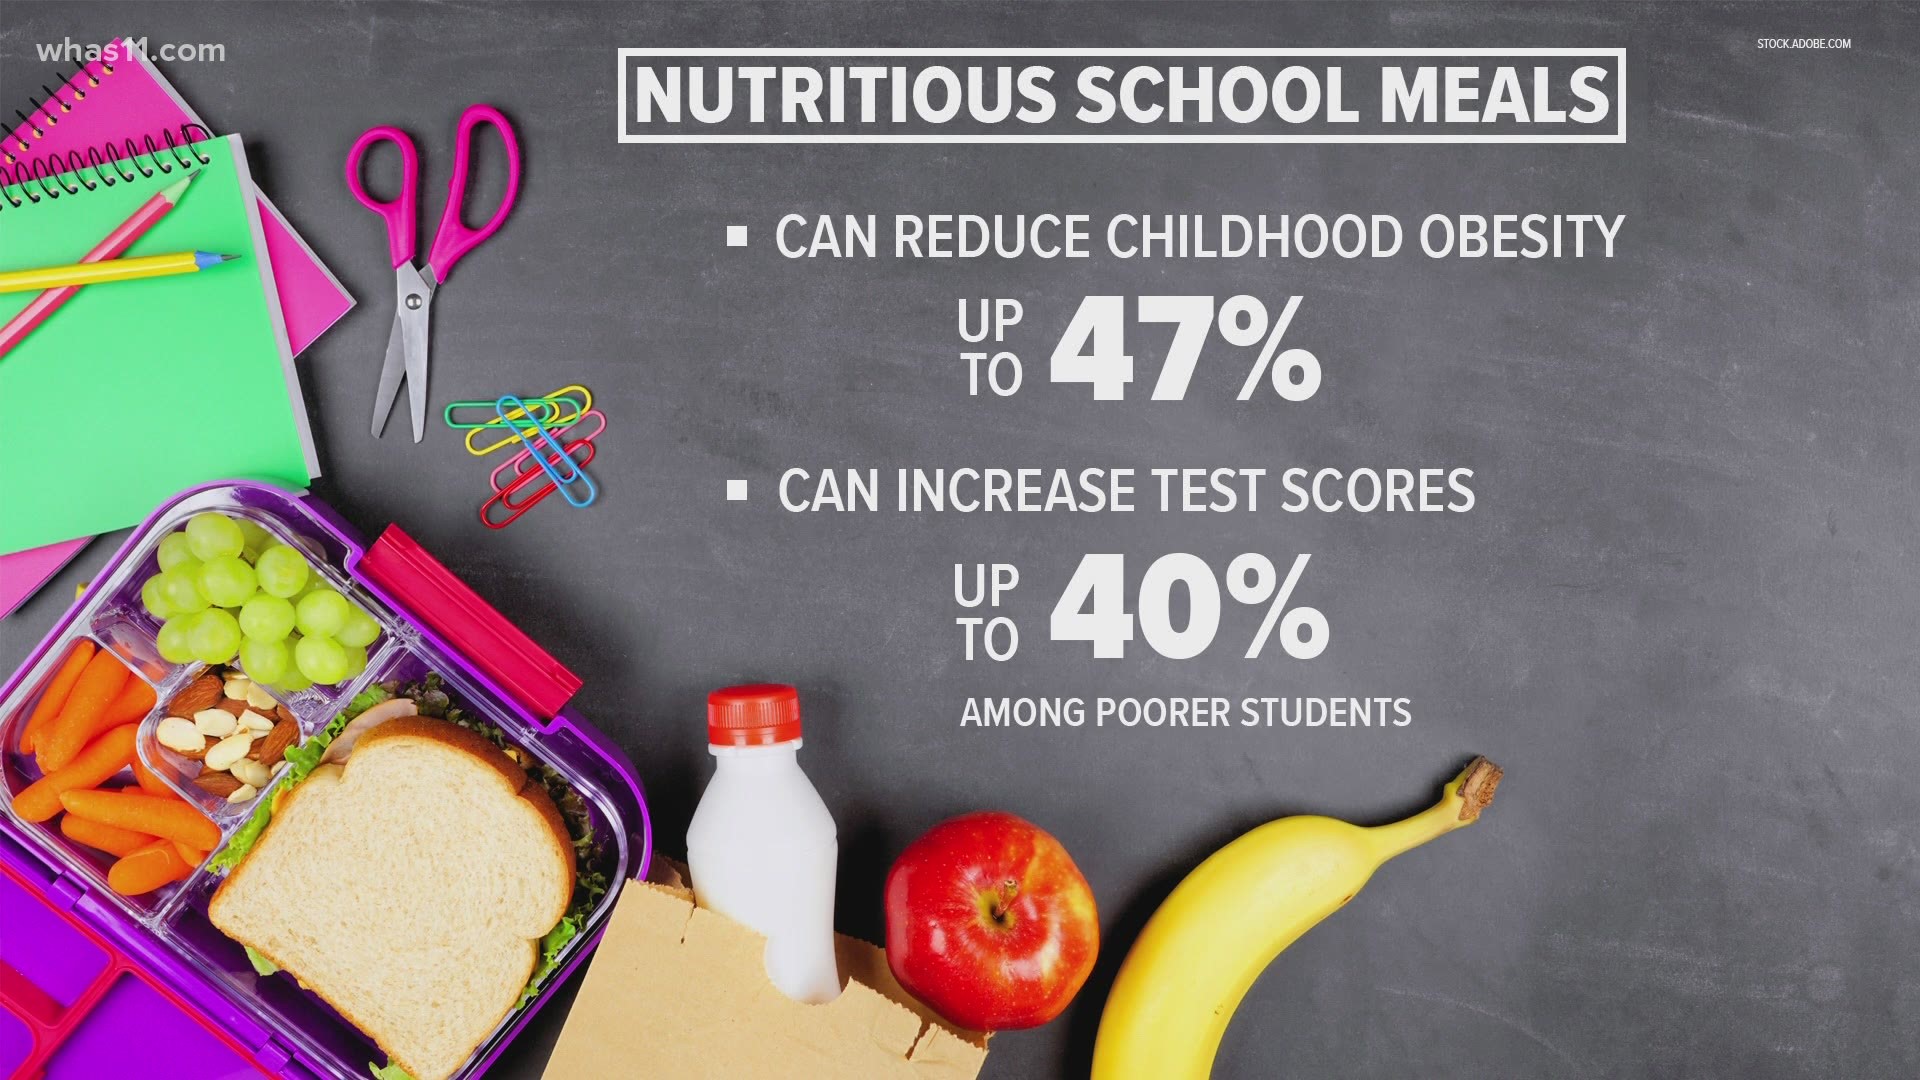 All families will have the opportunity for no-cost meals both at school and to take home, but it also means you might have one more quick task on your